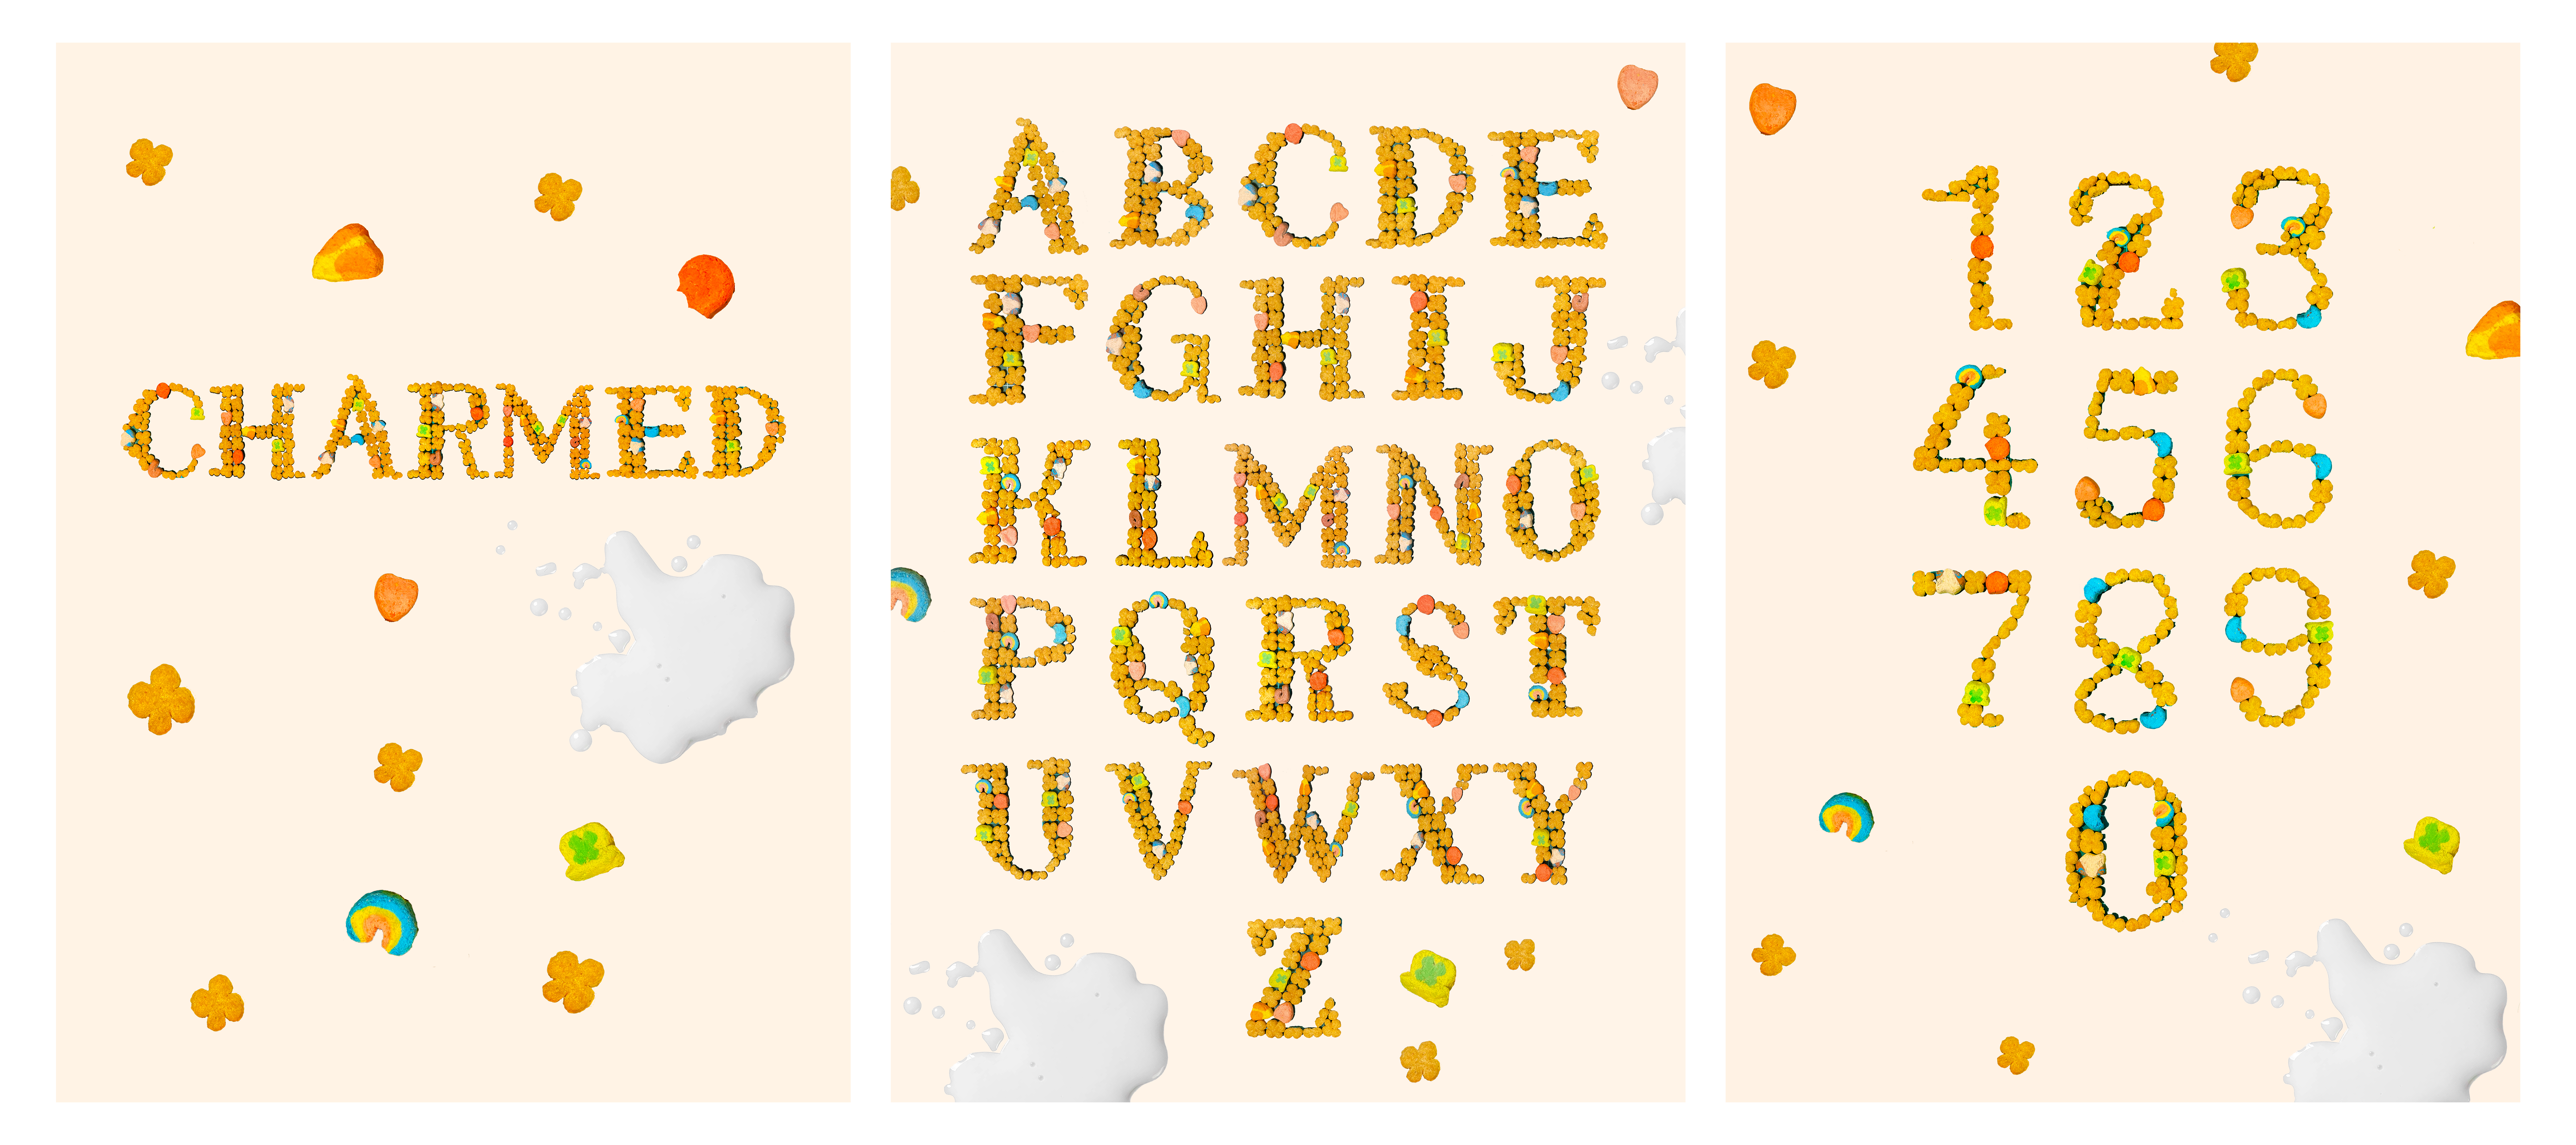 Charmed Typeface